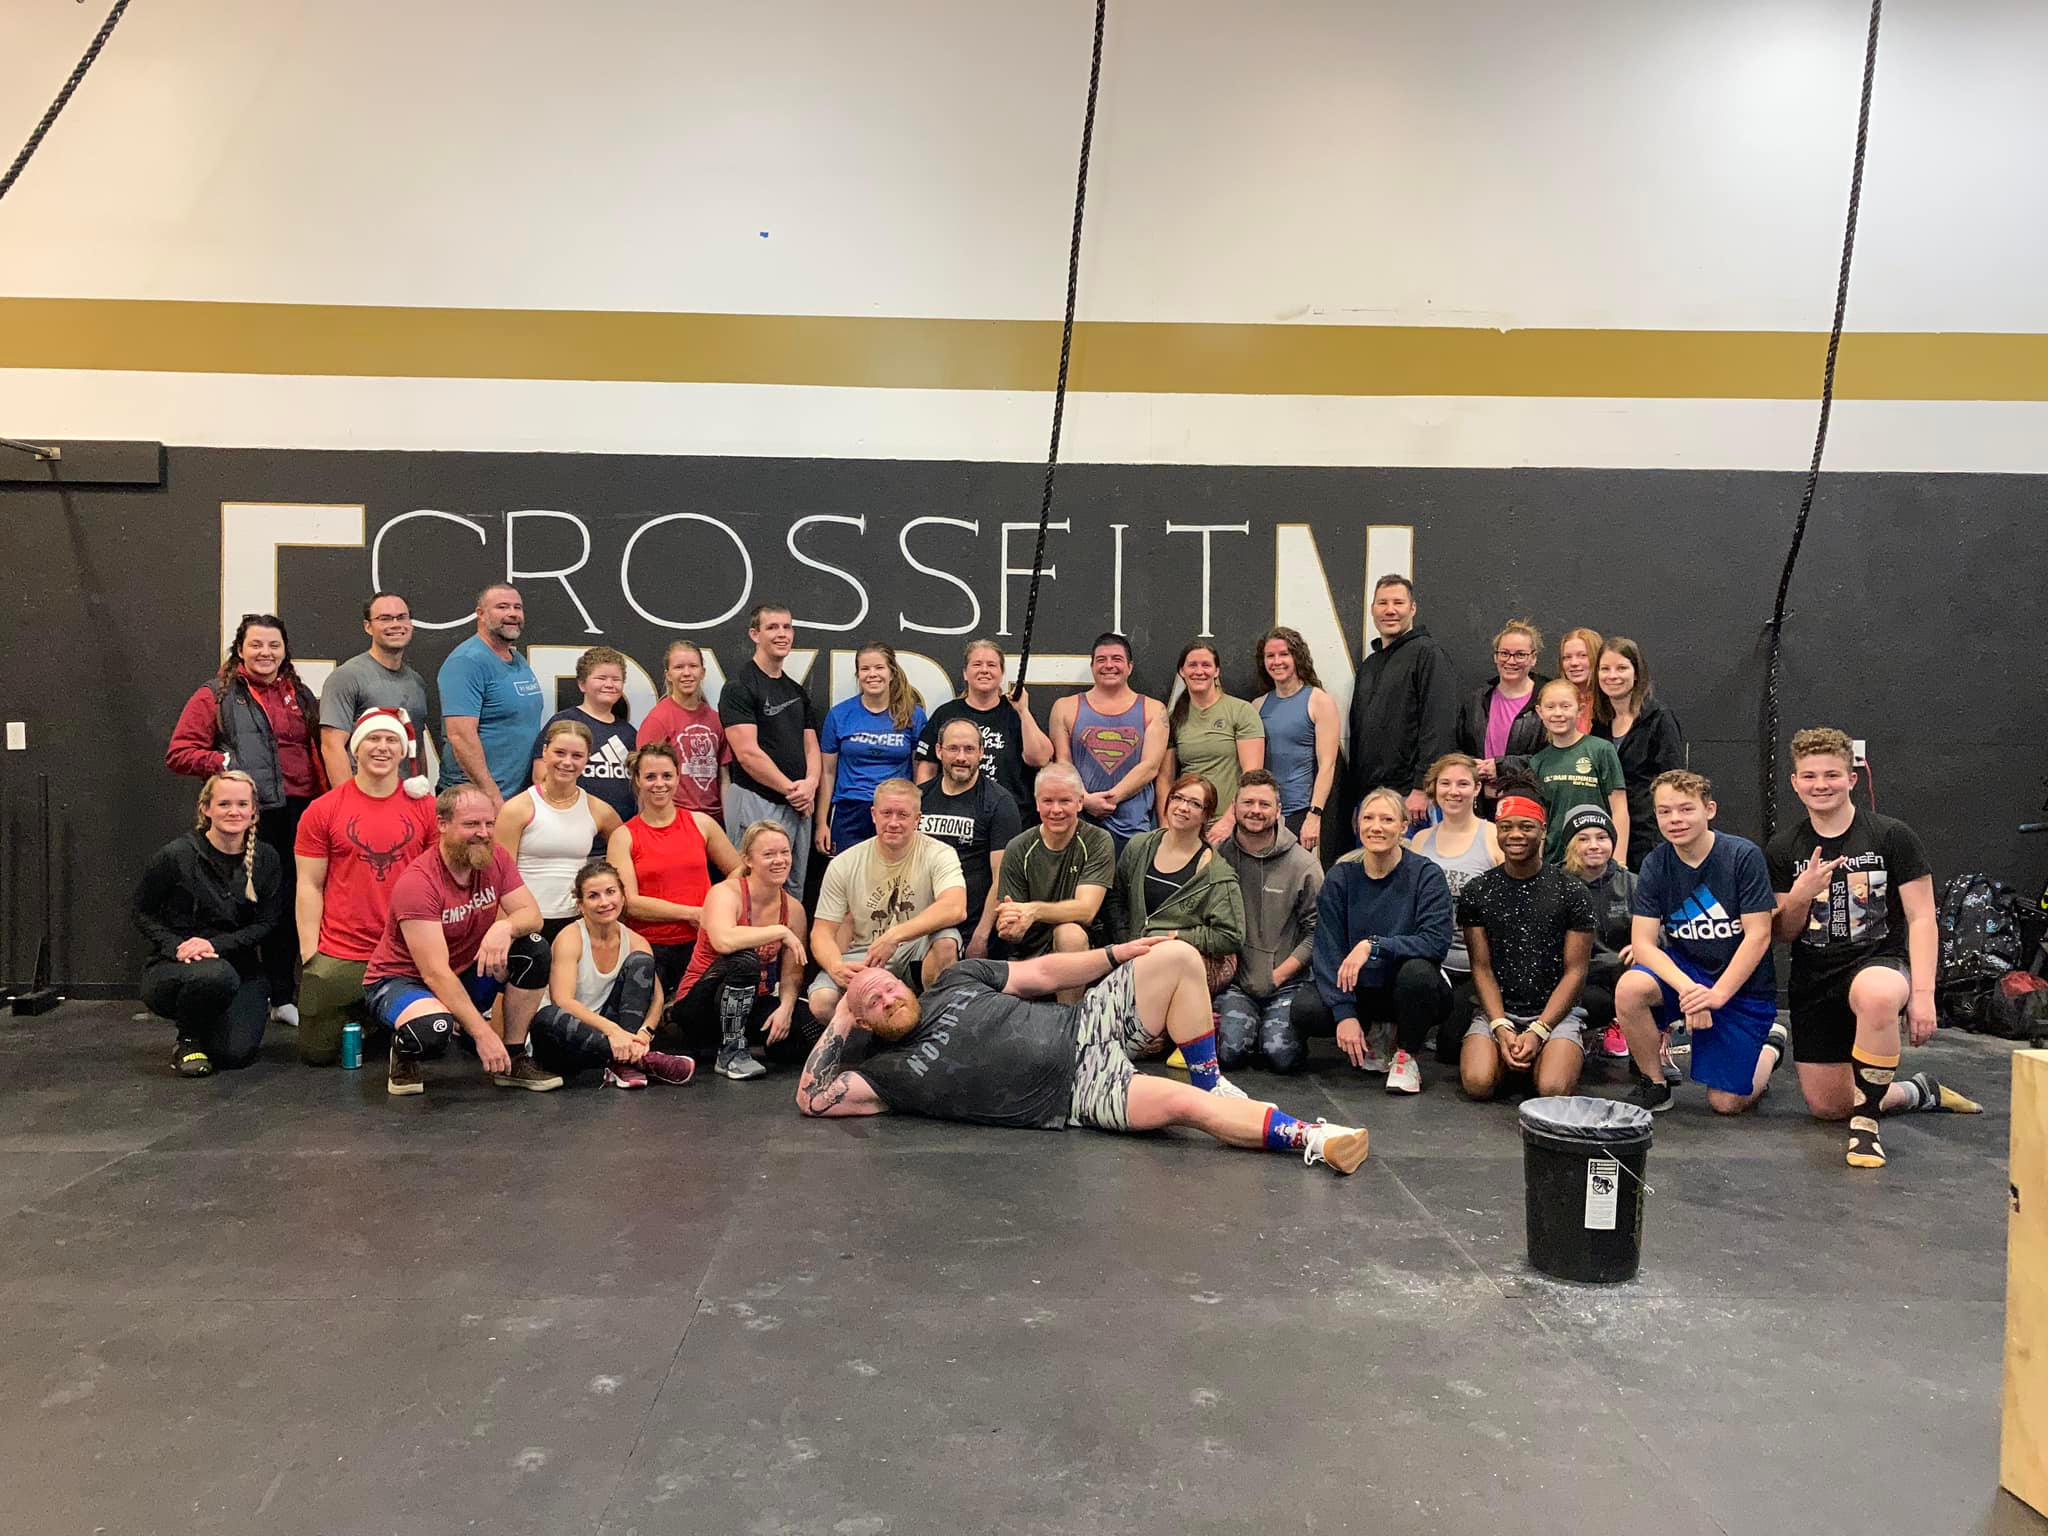 Group of people of different ages and skill levels doing CrossFit exercises in a gym, learning new skills and techniques